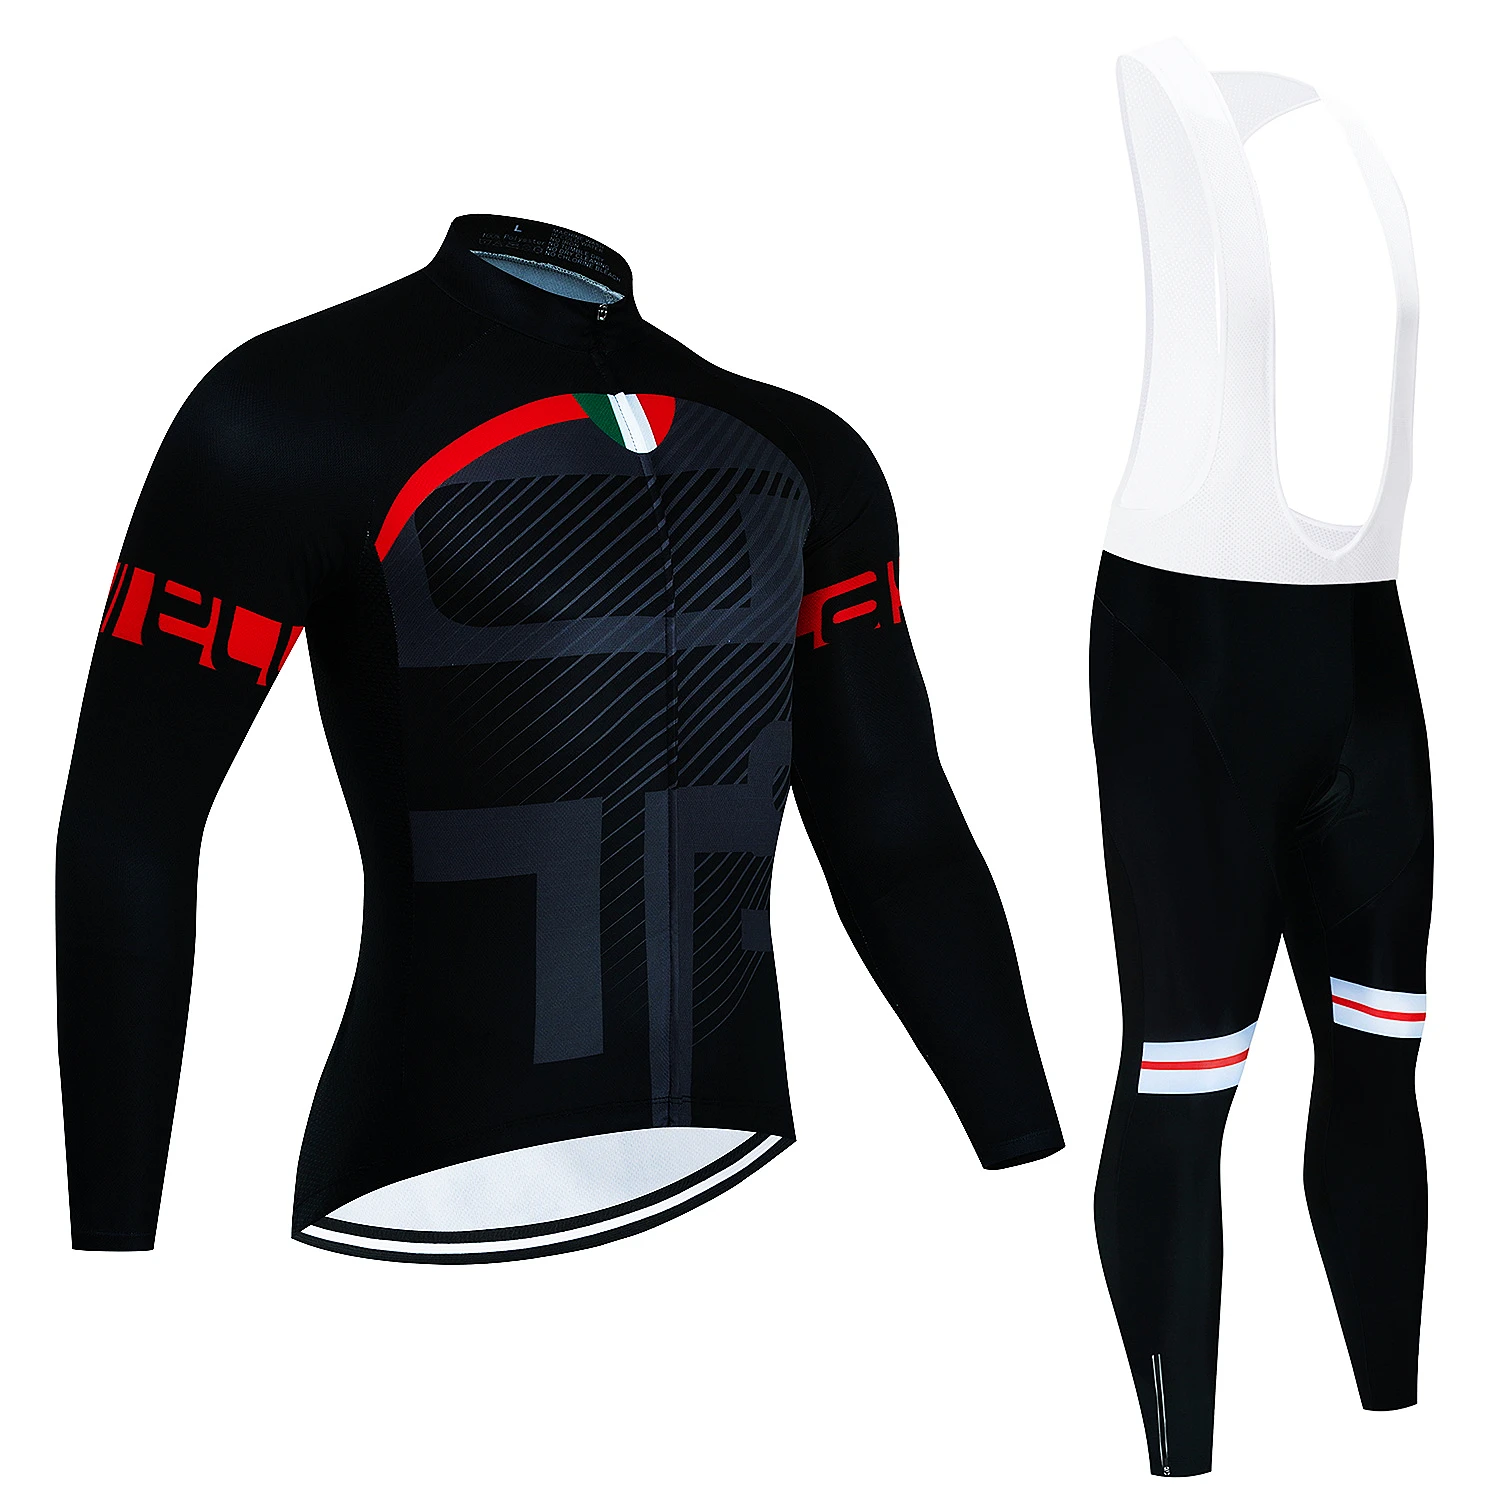 Cycling Team Men's Cycling Jersey Long Sleeve Set MTB Bike Clothing Tenue Velo Homme Bicycle Wear Trouser Cycle Uniform Kit